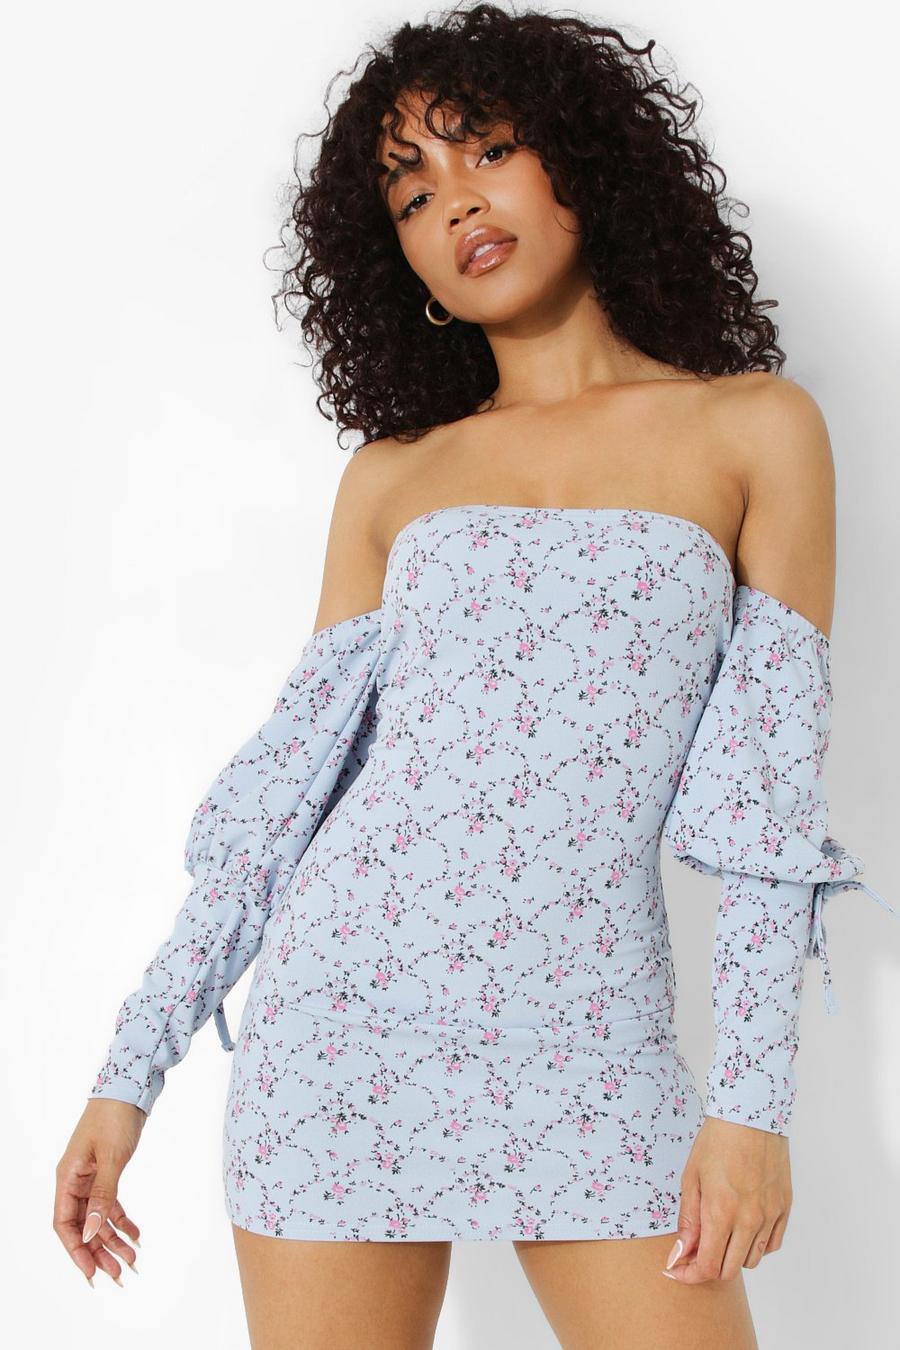 Sky Petite Ditsy Floral Off The Shoulder Boydcon Dress image number 1